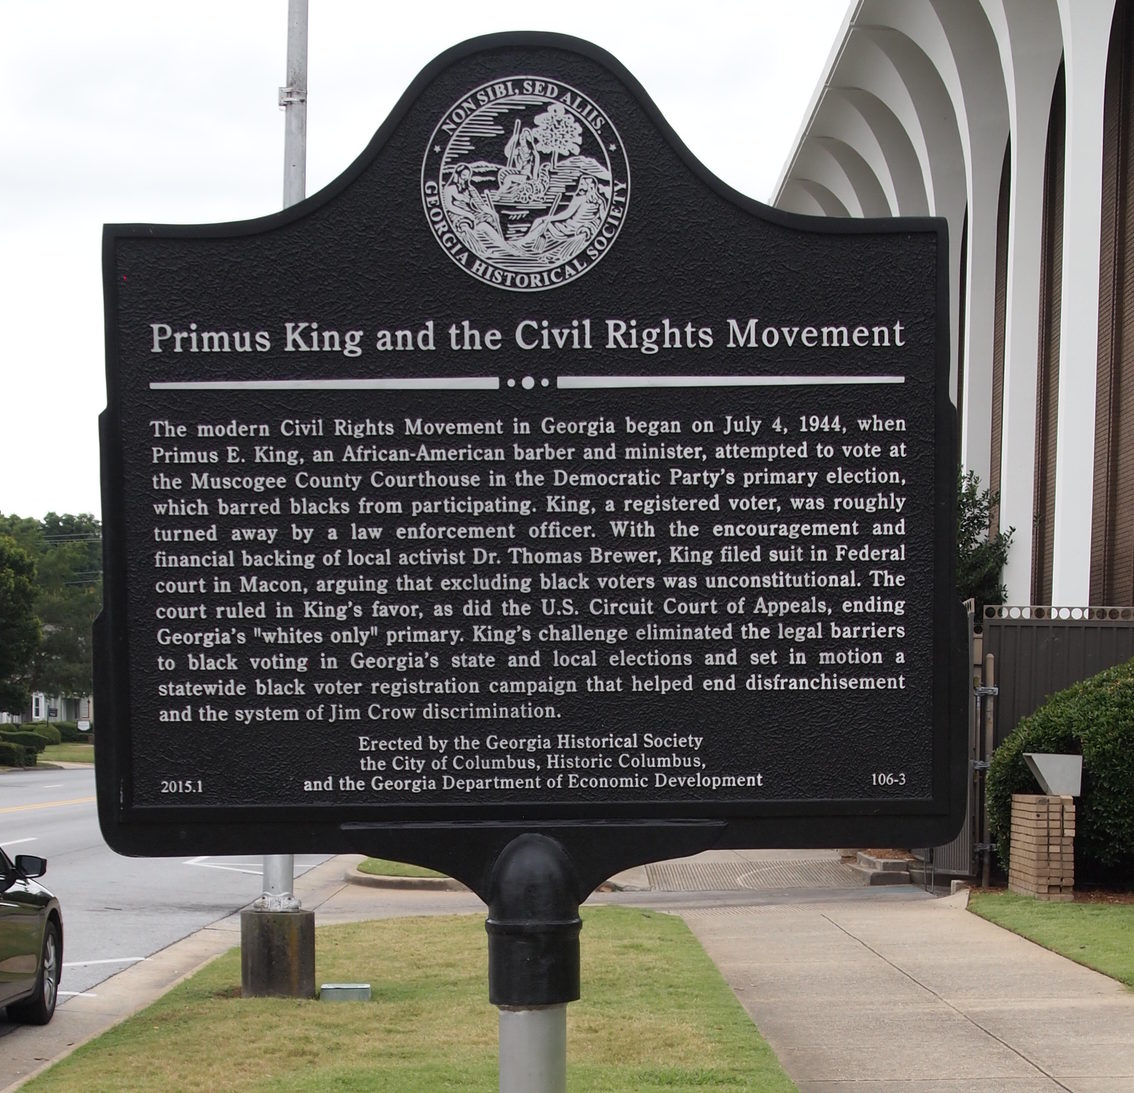 Historical marker dedicated to Primus King outside of the Muscogee County courthouse.  It reads, "The modern Civil Rights Movement in Georgia began on July 4, 1944, when Primus E. King, an African-American barber and minister, attempted to vote at the Muscogee County Courthouse in the Democratic Party’s primary election, which barred Blacks from participating. King, a registered voter, was roughly turned away by a law enforcement officer. With the encouragement and financial backing of local activist Dr. Thomas Brewer, King filed suit in Federal court in Macon, arguing that excluding Black voters was unconstitutional. The court ruled in King’s favor, as did the U.S. Circuit Court of Appeals, ending Georgia’s “whites only” primary. King’s challenge eliminated the legal barriers to Black voting in Georgia’s state and local elections and set in motion a statewide Black voter registration campaign that helped end disfranchisement and the system of Jim Crow discrimination."